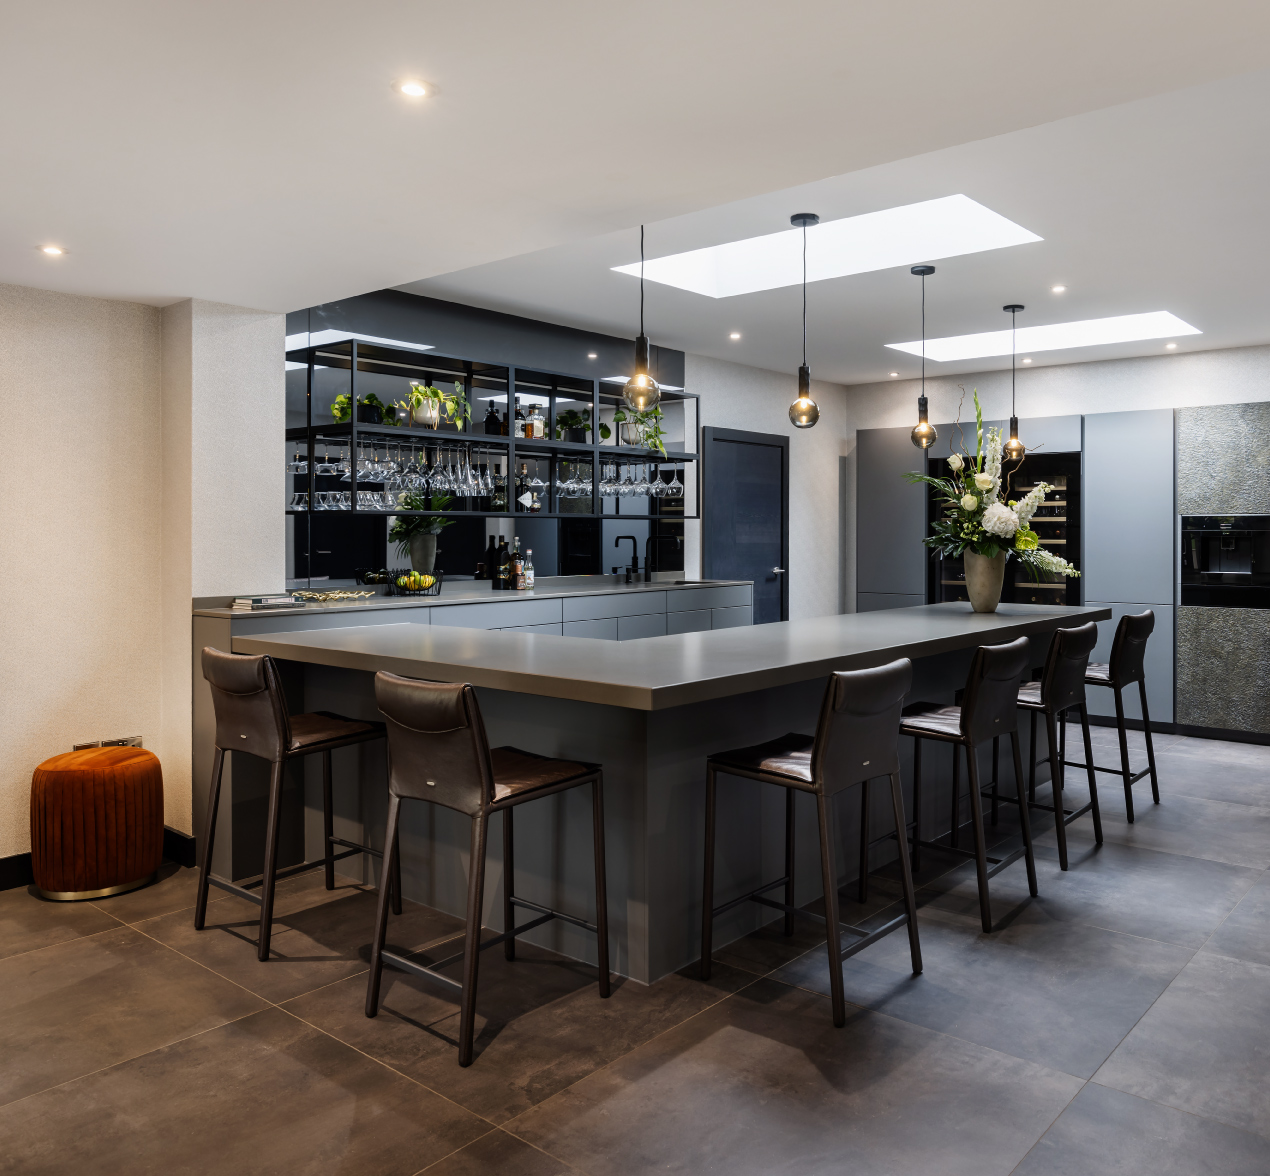 A new bar and entertainment area to complement a Kitchen Design Centre Kitchen